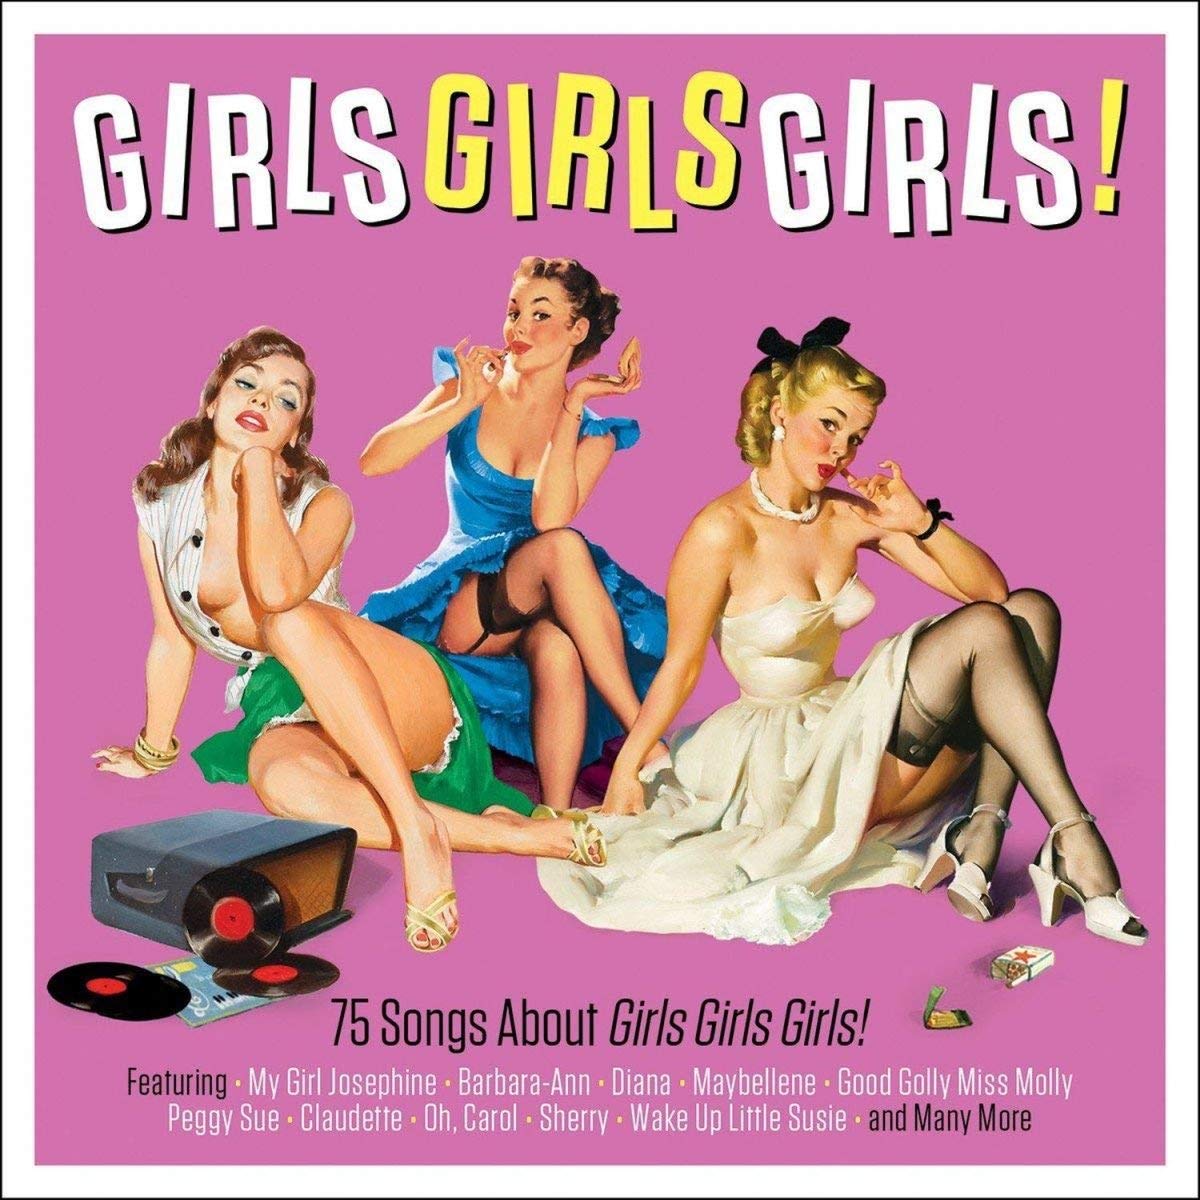 GIRLS GIRLS GIRLS!: Fats Domino, Four Seasons, Bobby Vee, Regents, Everly Brothers (3 CDS)